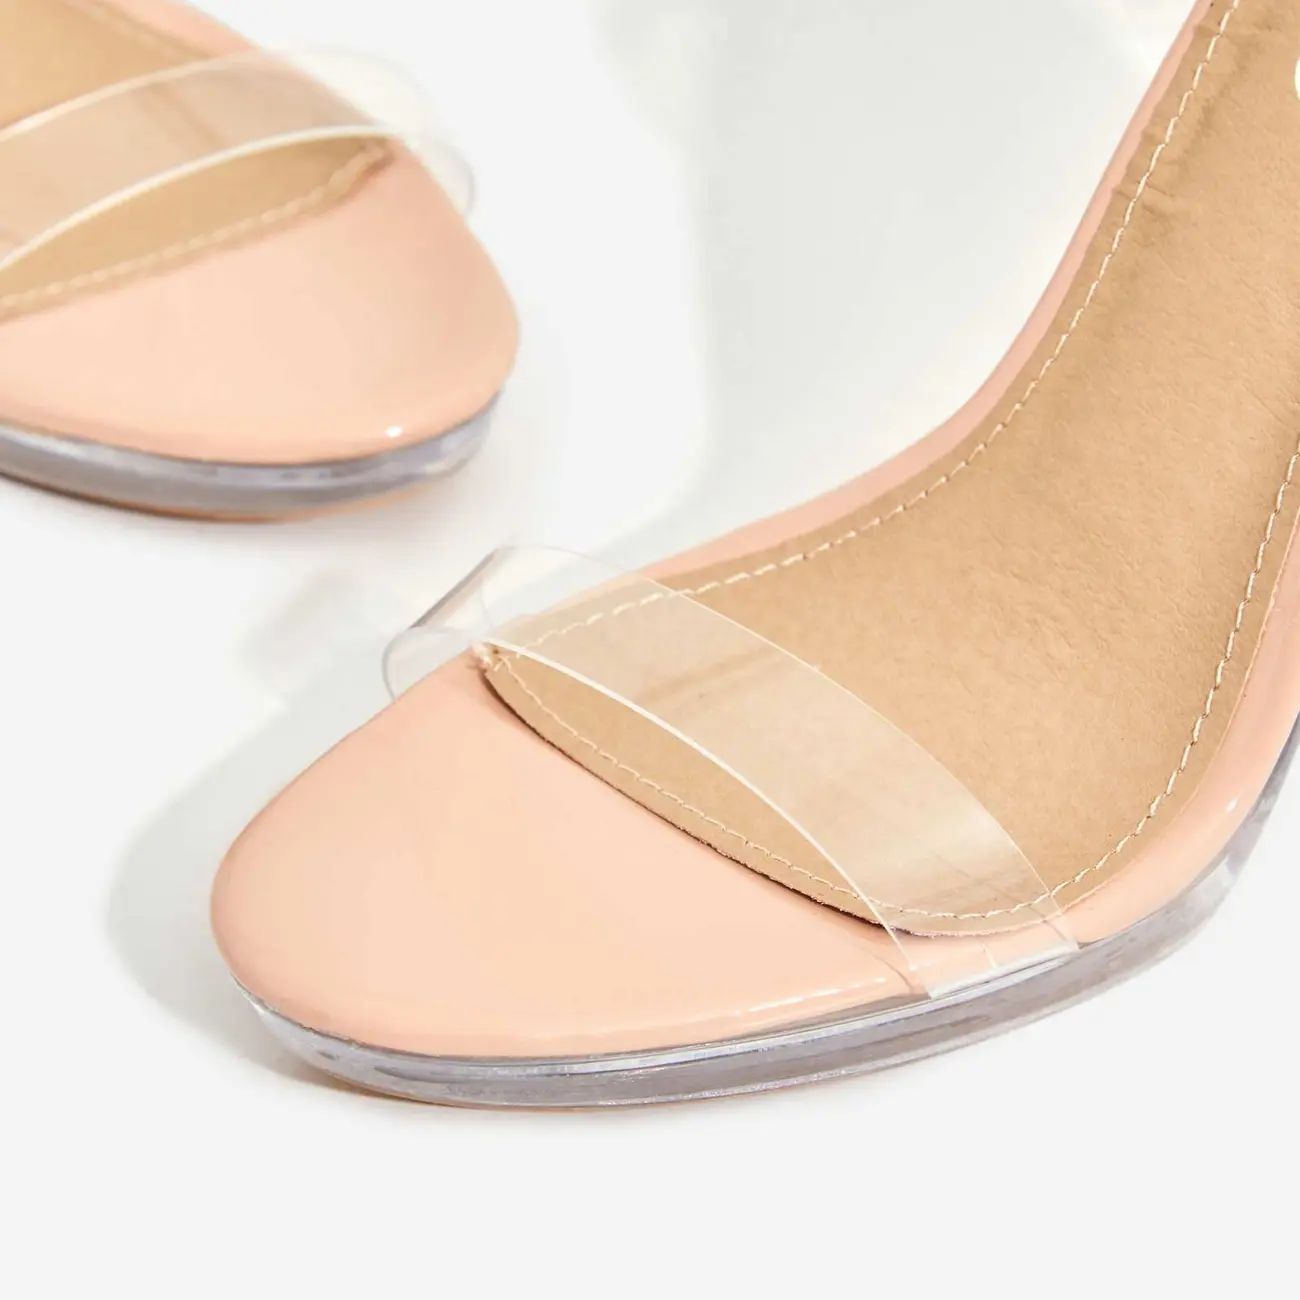 Icy Platform Barely There Perspex Thin Block Clear Heel In Nude Patent | EGO Shoes (US & Canada)